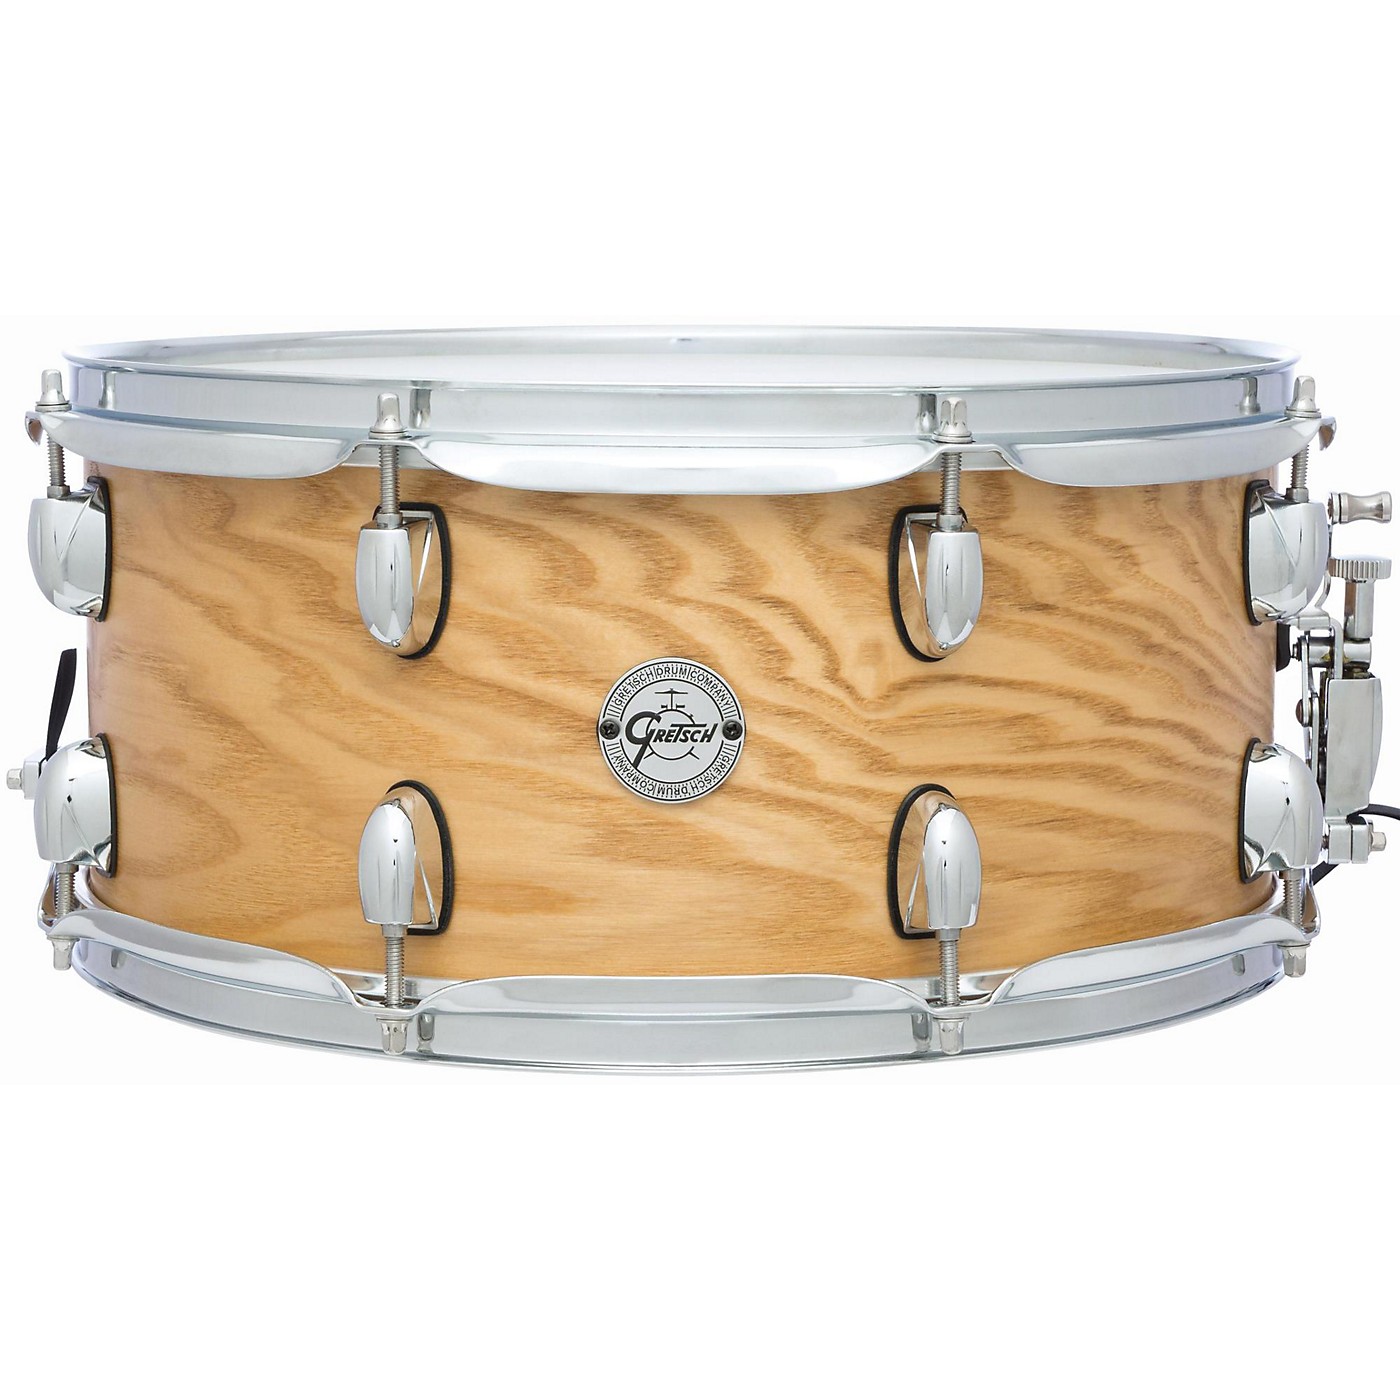 Gretsch Drums Silver Series Ash Snare Drum thumbnail